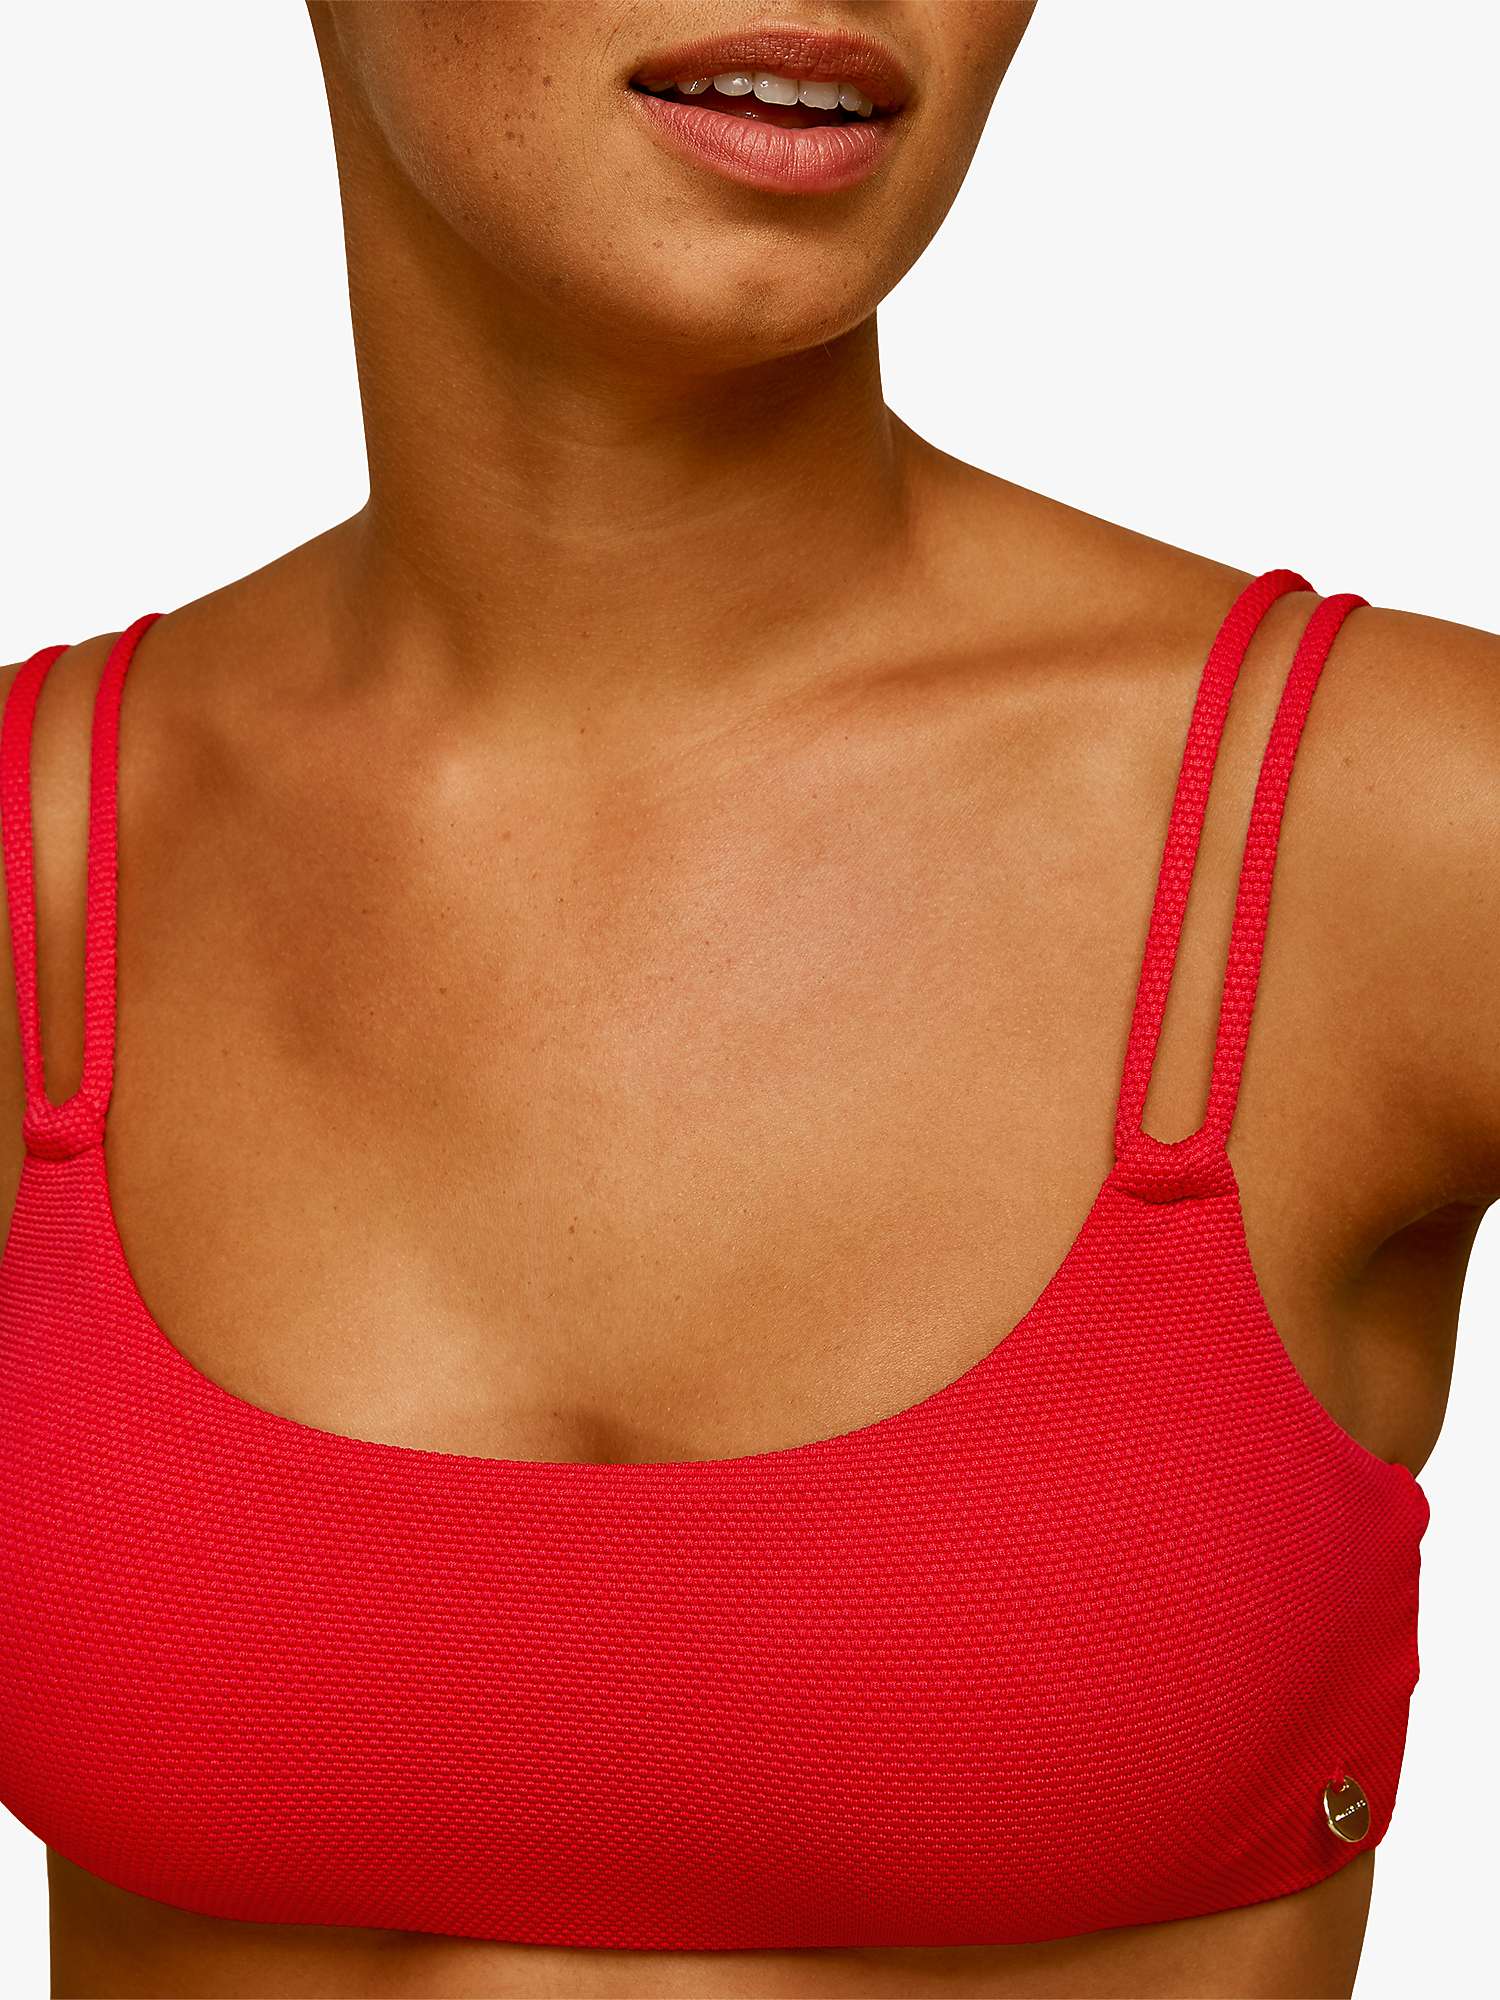 Buy Whistles Double Strap Bikini Top, Red Online at johnlewis.com